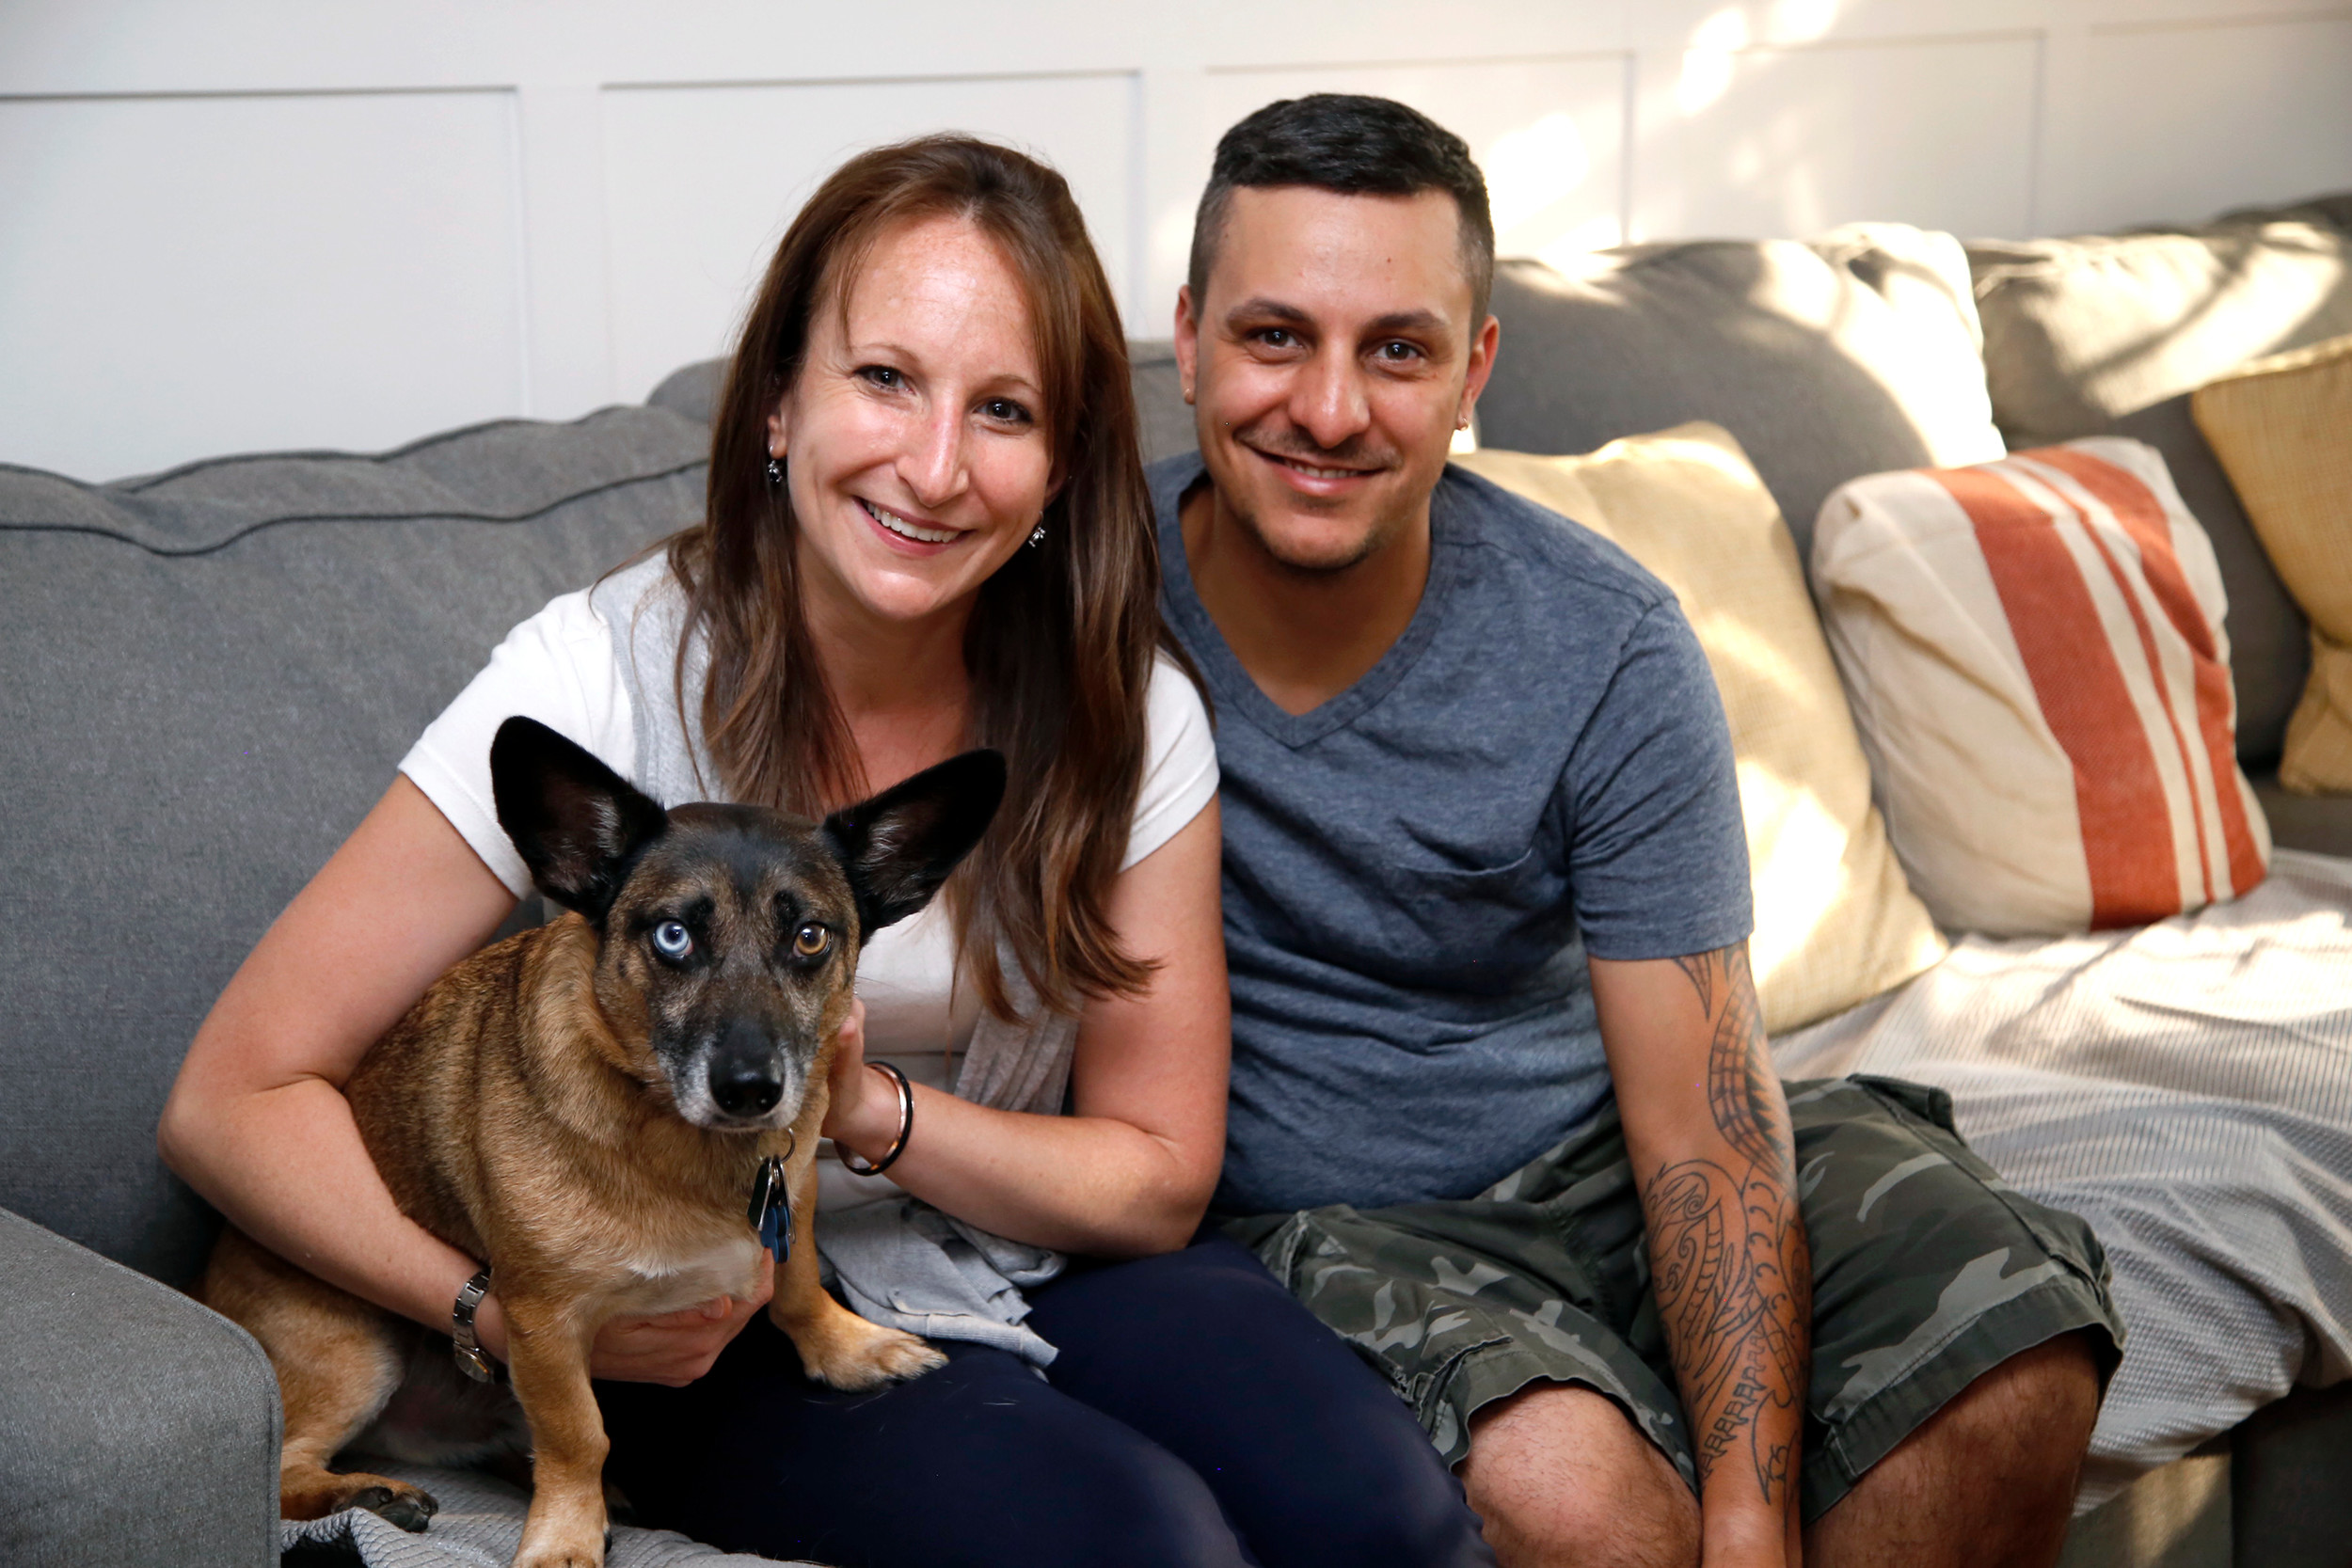 Veronica Silva, founder of Pawfect For You, with her husband Joey and their dog, JakeBear, in their Malverne home last week.